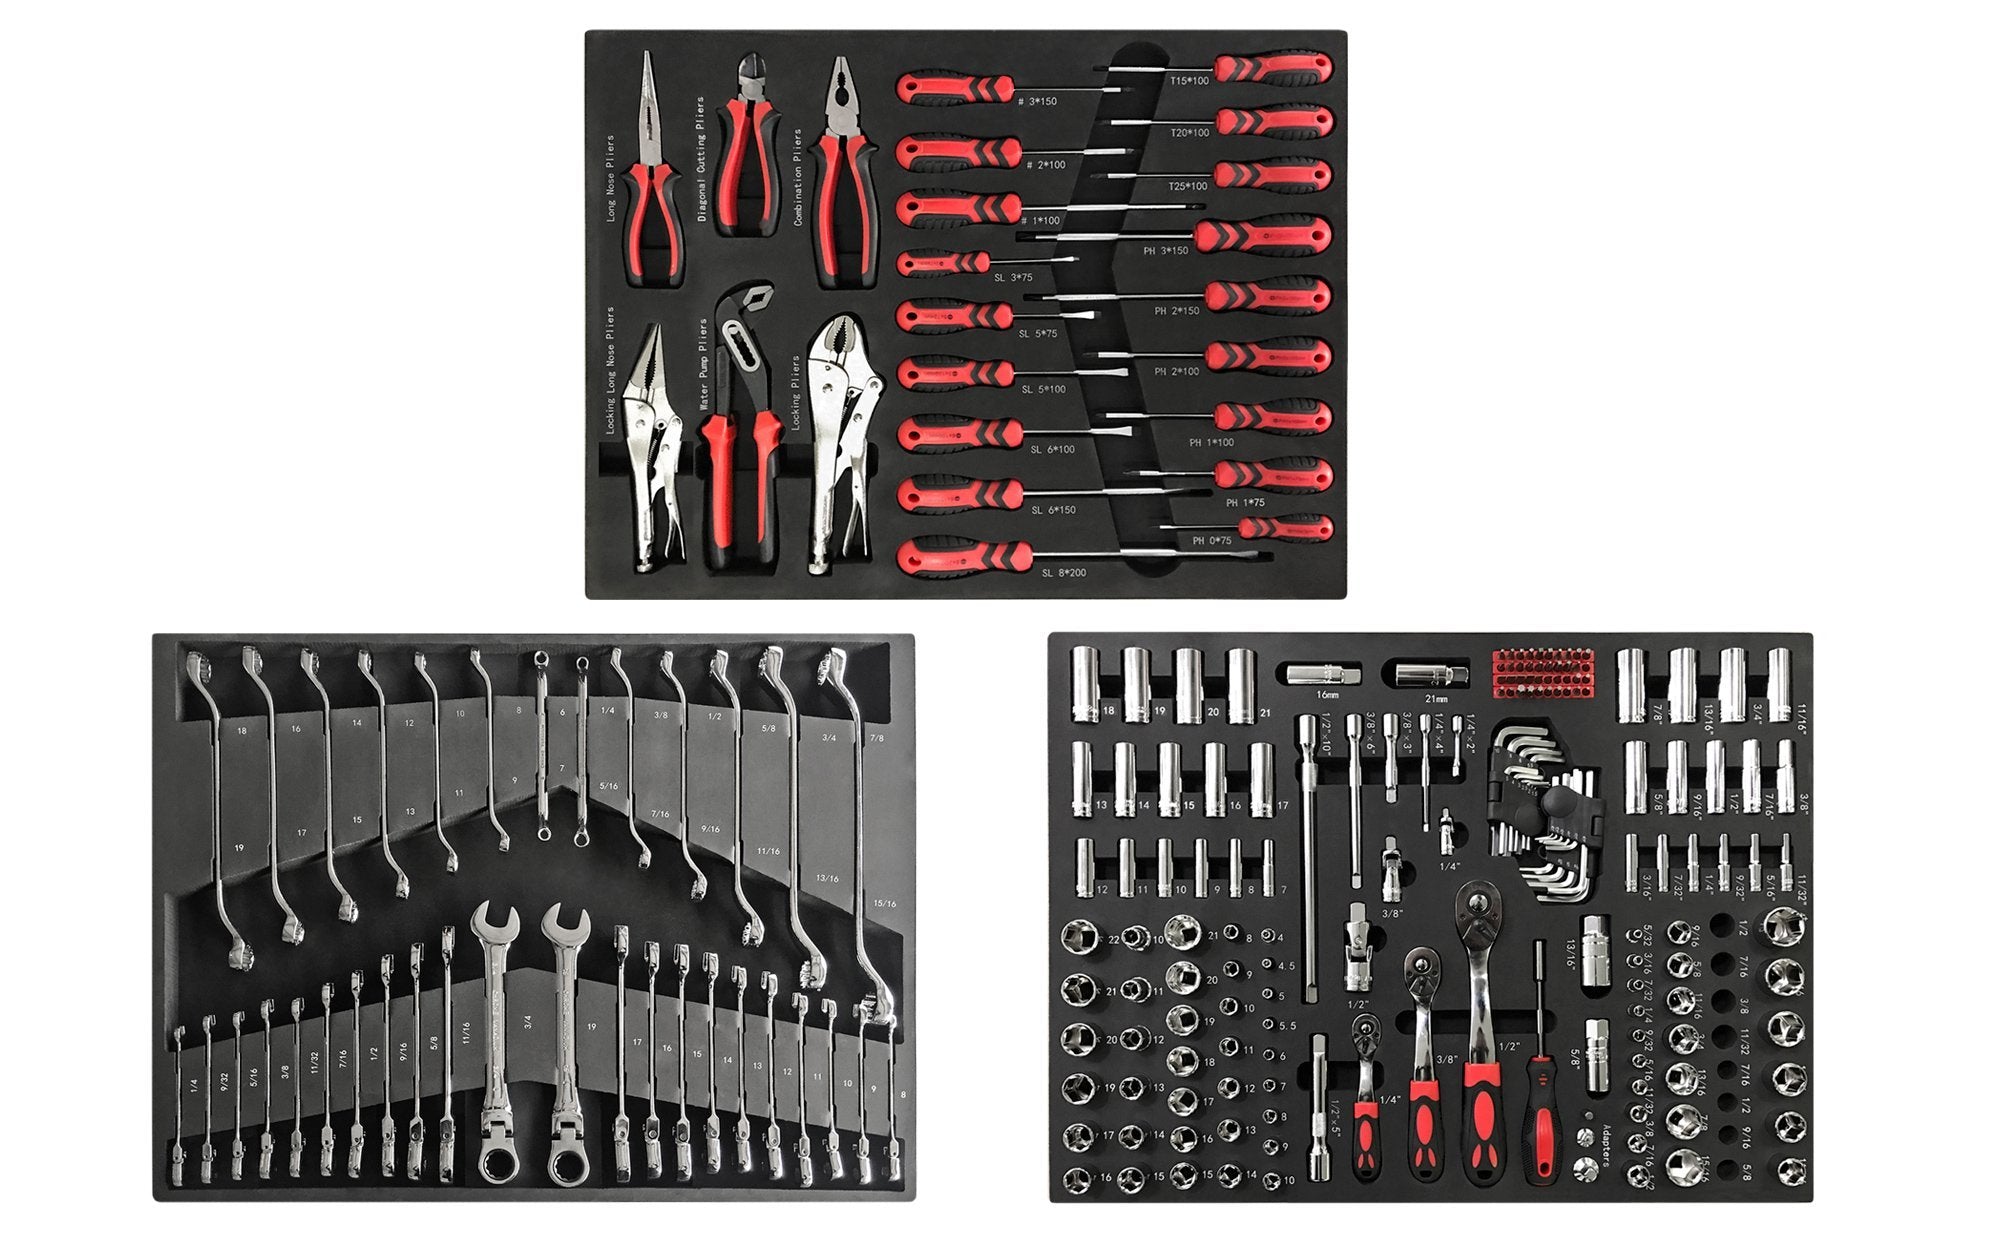 Pro Series Socket, Screwdriver, Plier and Wrench Tray